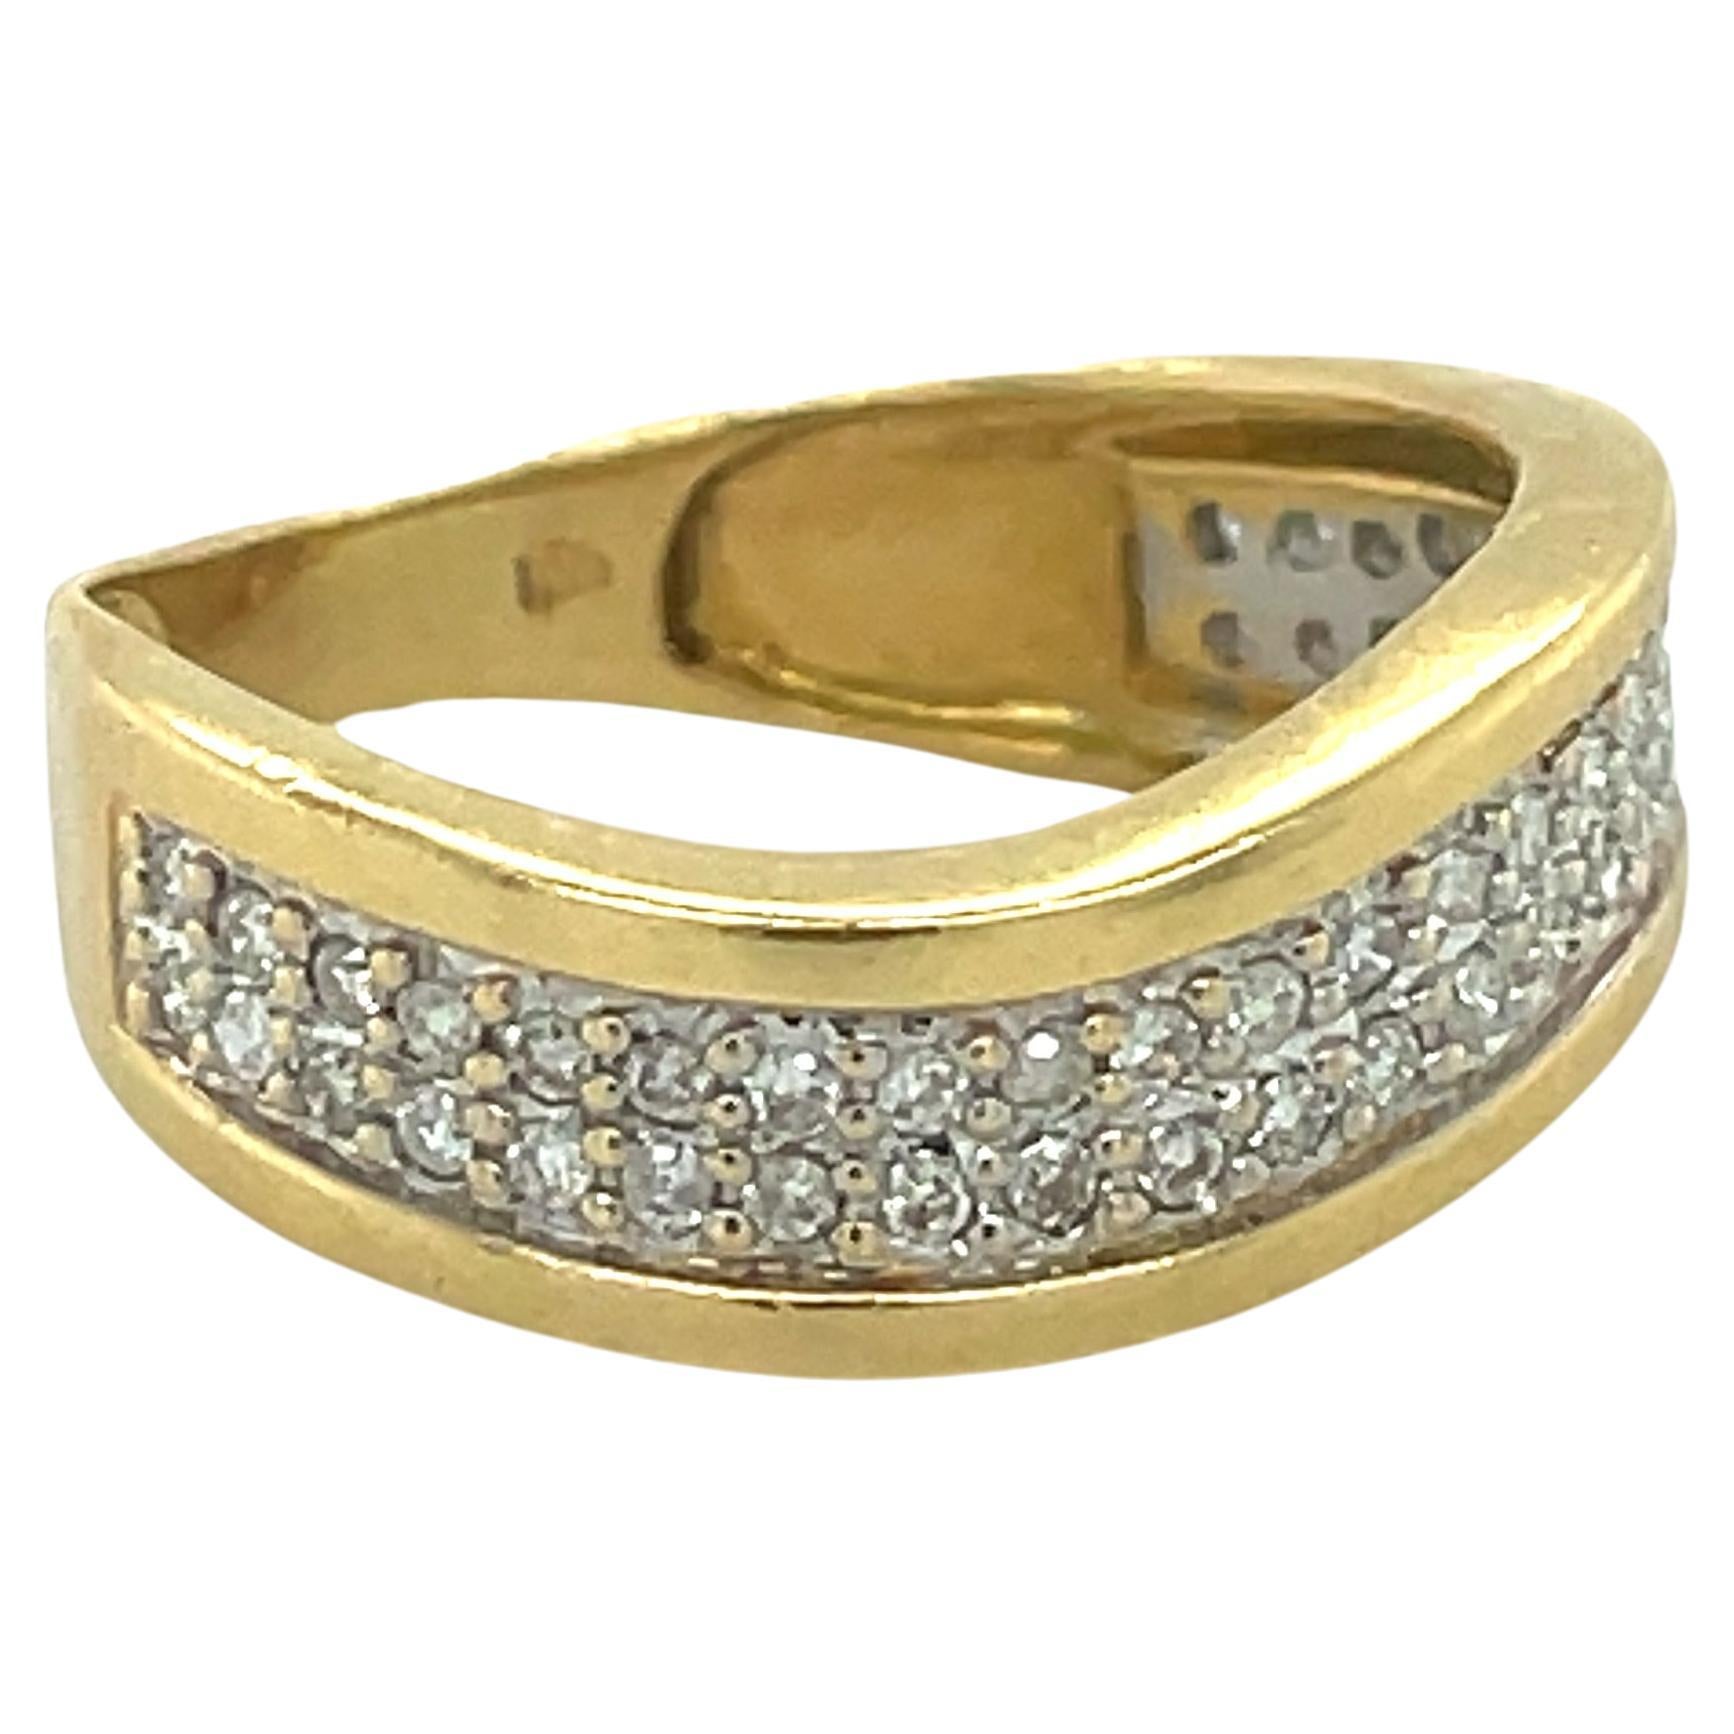 Jewelry Material: Yellow Gold 18k (the gold has been tested by a professional)
Total Carat Weight: 0.25ct (Approx.)
Total Metal Weight: 3.02g
Size: 5.5 US \ EU 50 \ Diameter 15.90mm (inner diameter)

Grading Results:
Stone Type: Diamond
Shape: